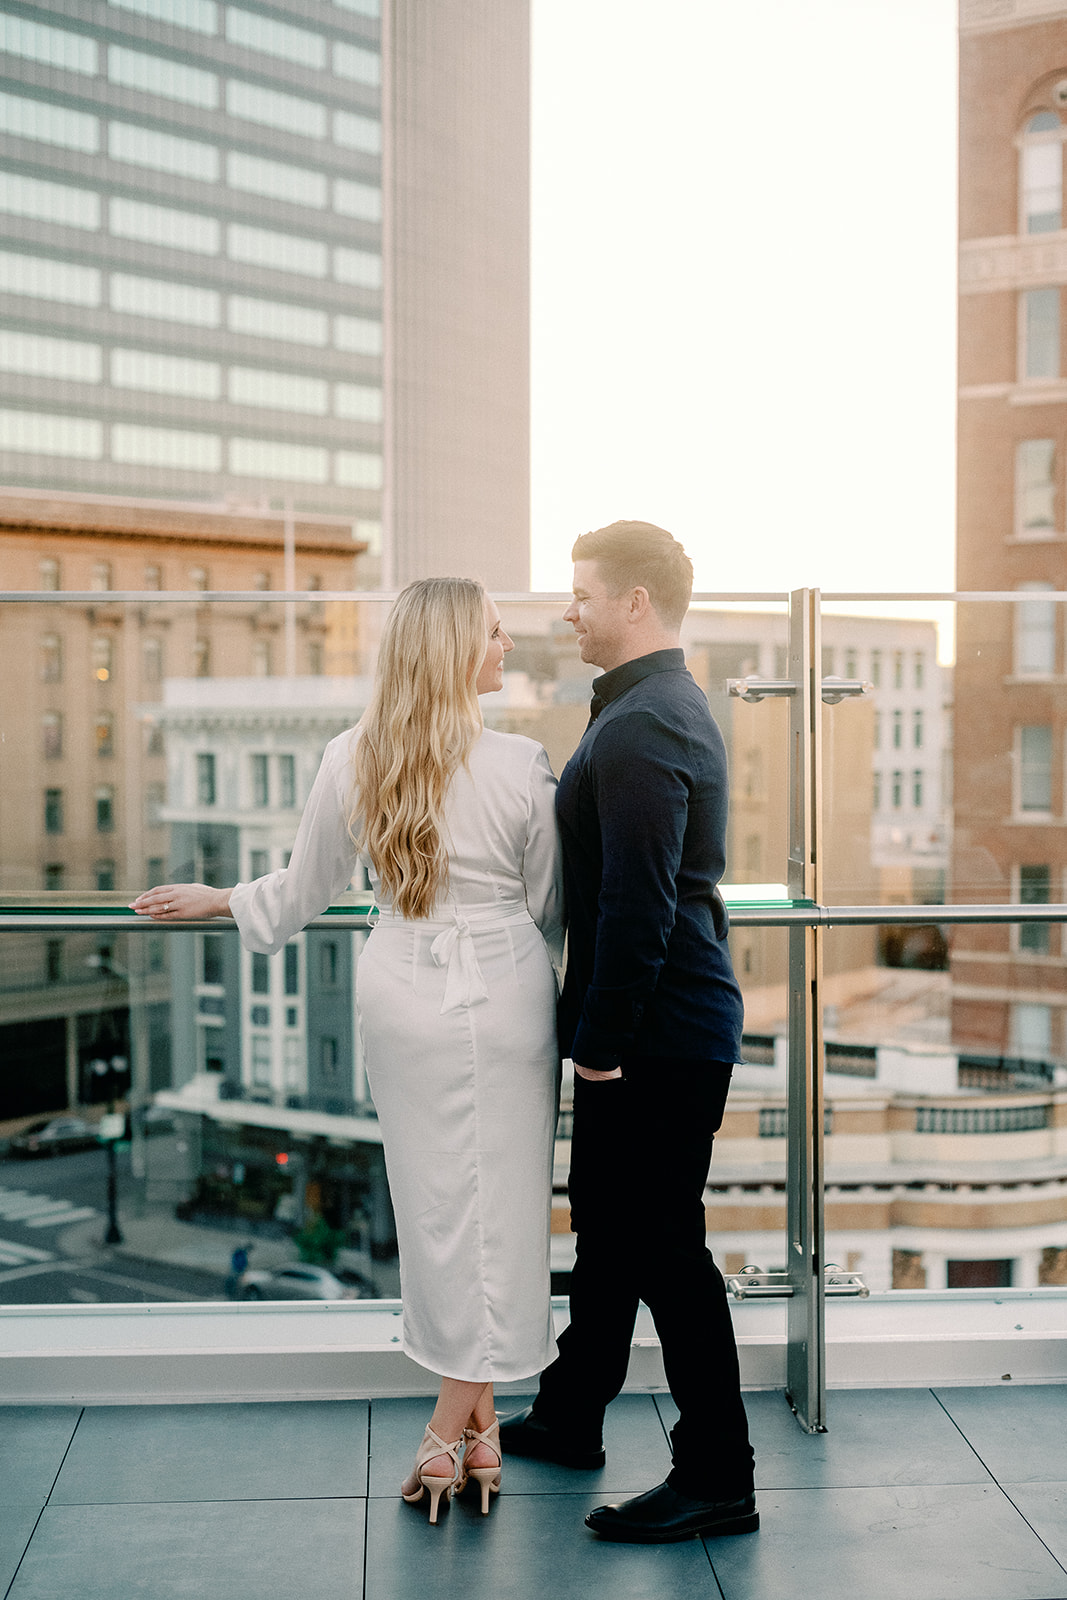 Rooftop Bar Engagement Session in Oakland California during sunset golden hour. High End Luxury Wedding Photographer. 